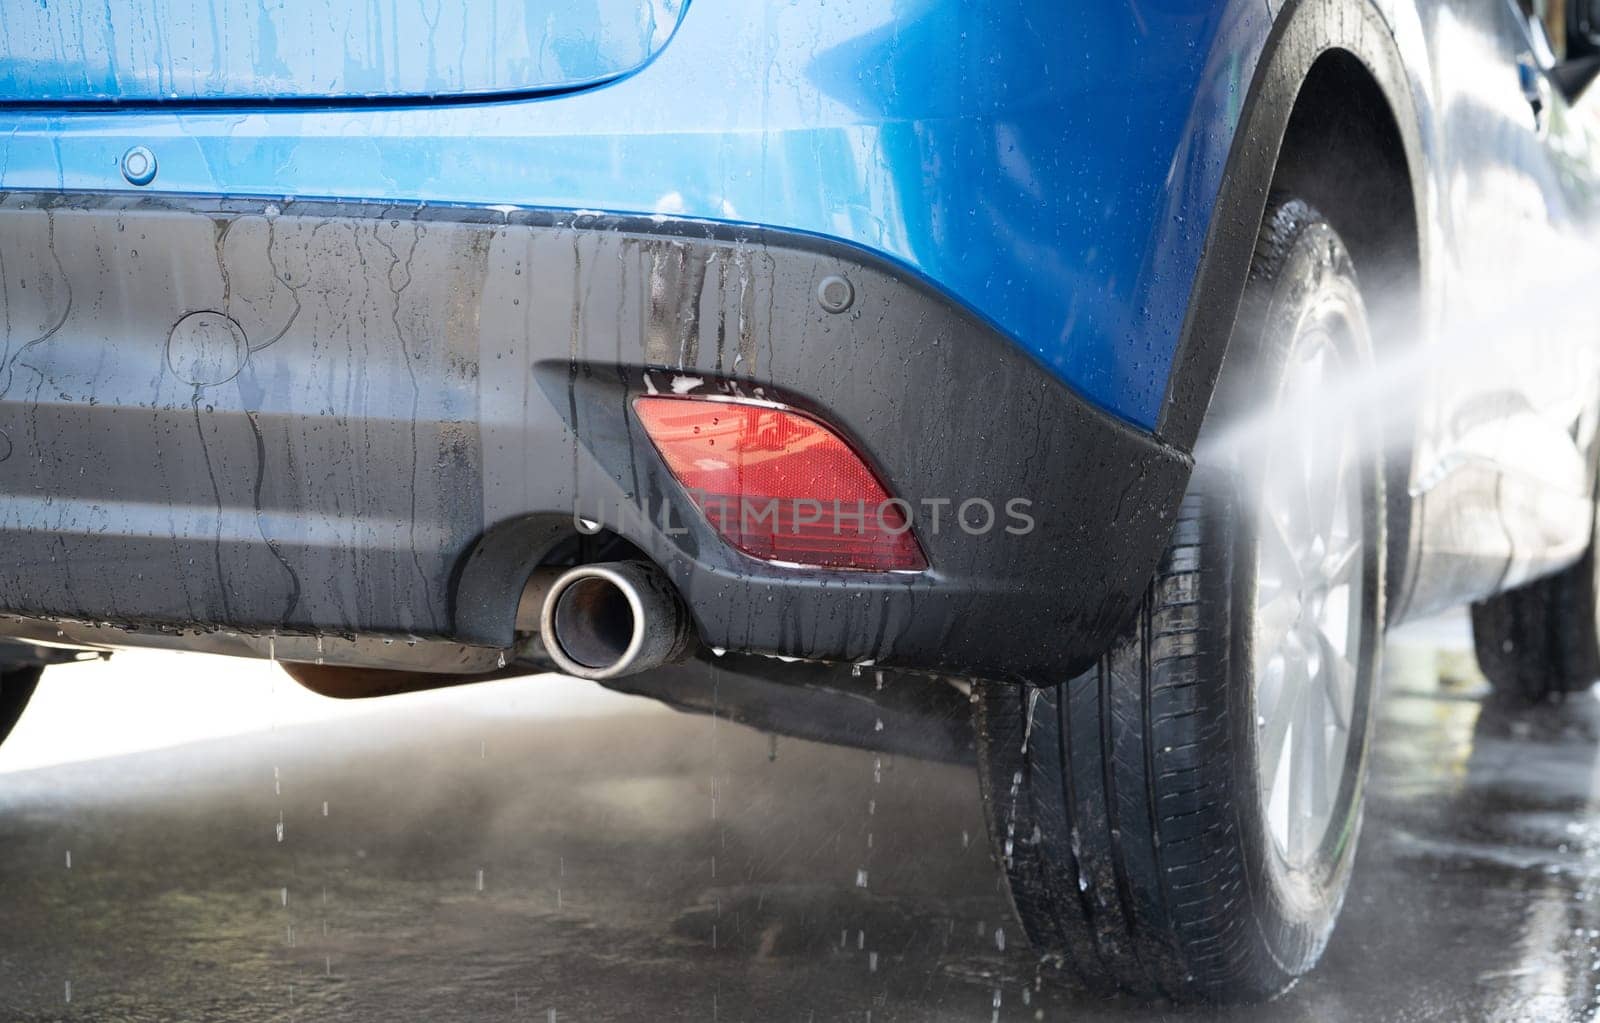 Car washing with high pressure water spray. Car cleaning. Auto care service concept. Vehicle cleaning. High pressure water spraying on car wheel and tyre. Manual car wash with high pressure water.